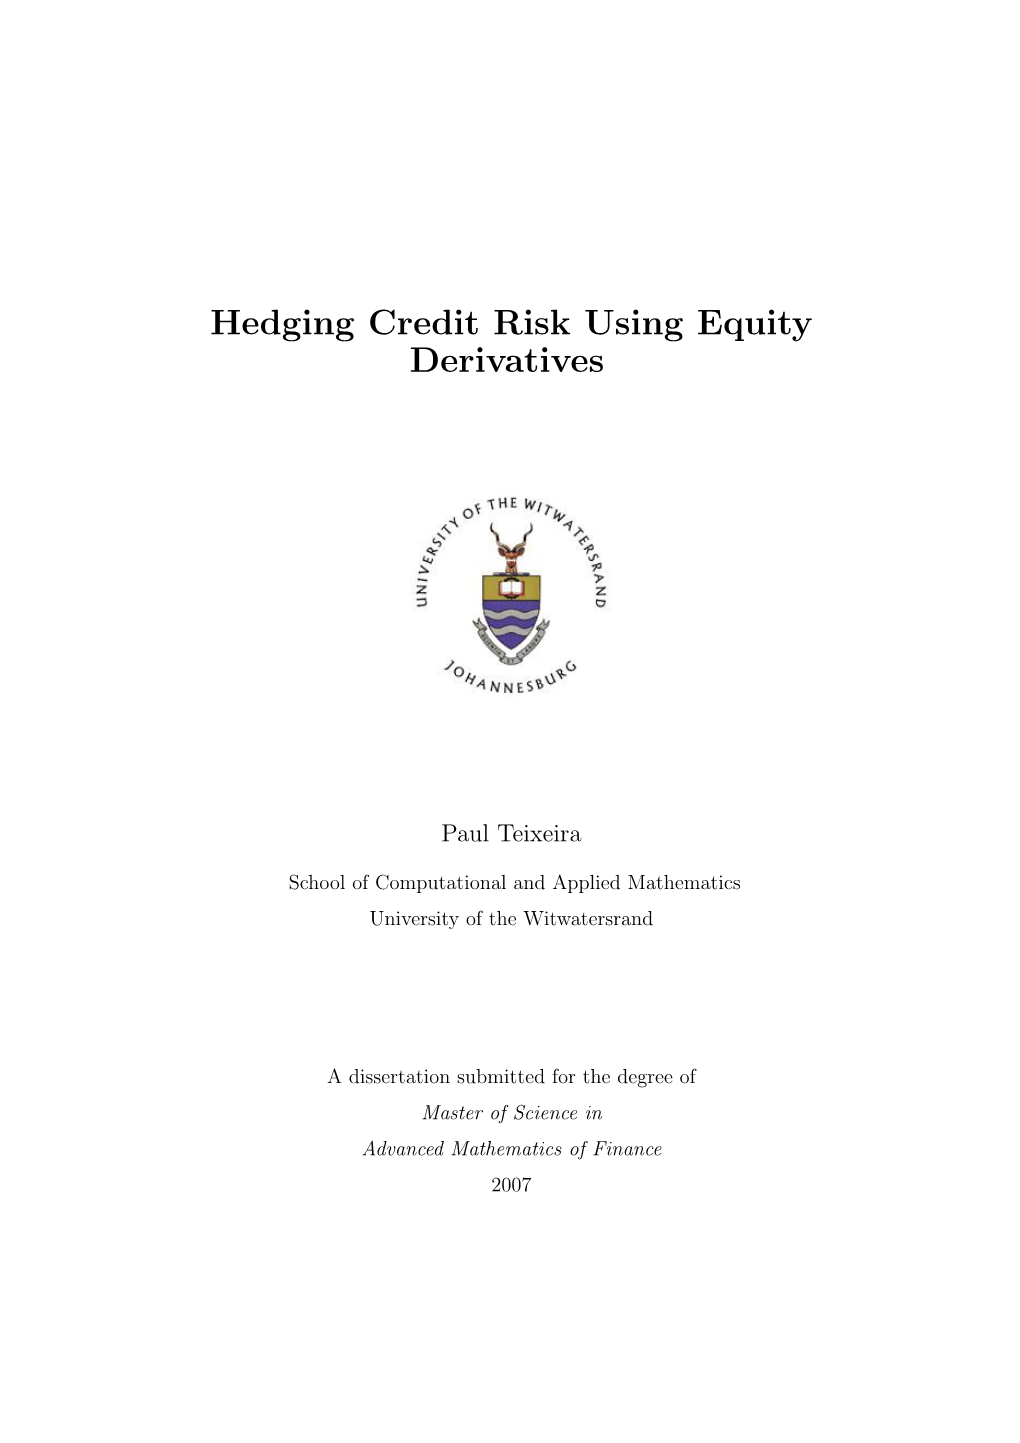 Hedging Credit Risk Using Equity Derivatives